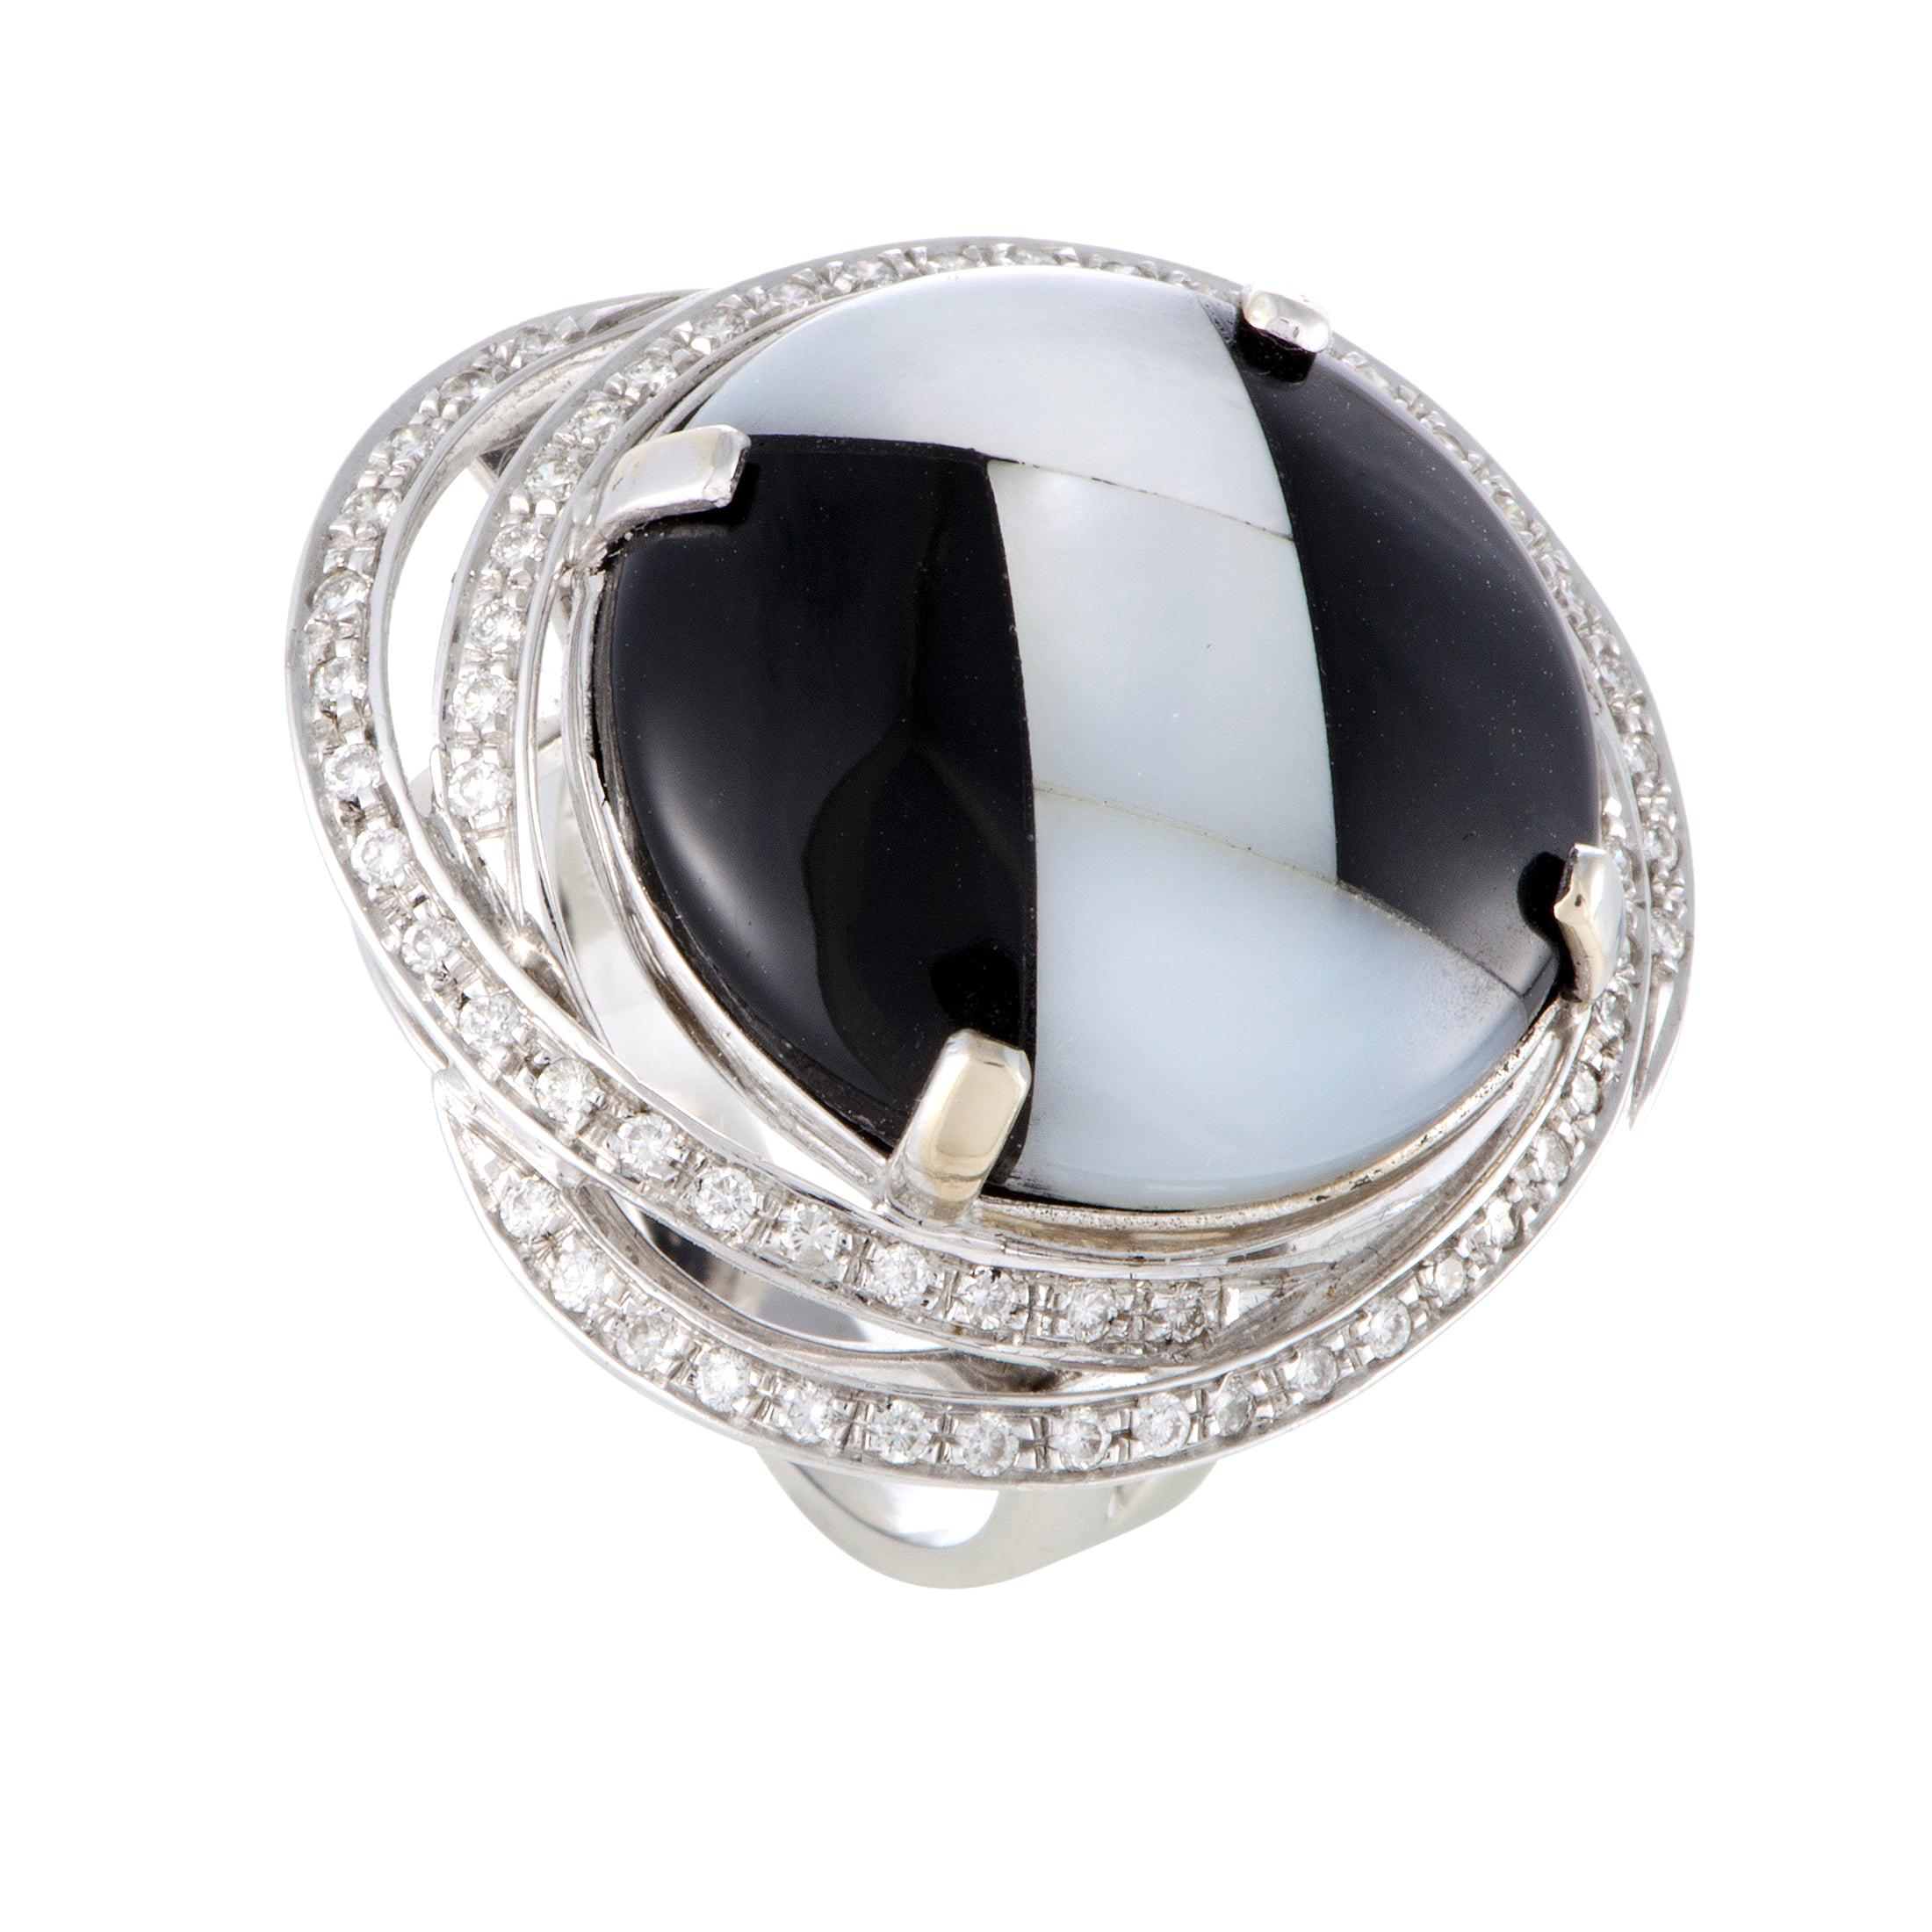 Italian Collection 18 Karat White Gold Diamond Onyx and Mother of Pearl Ring